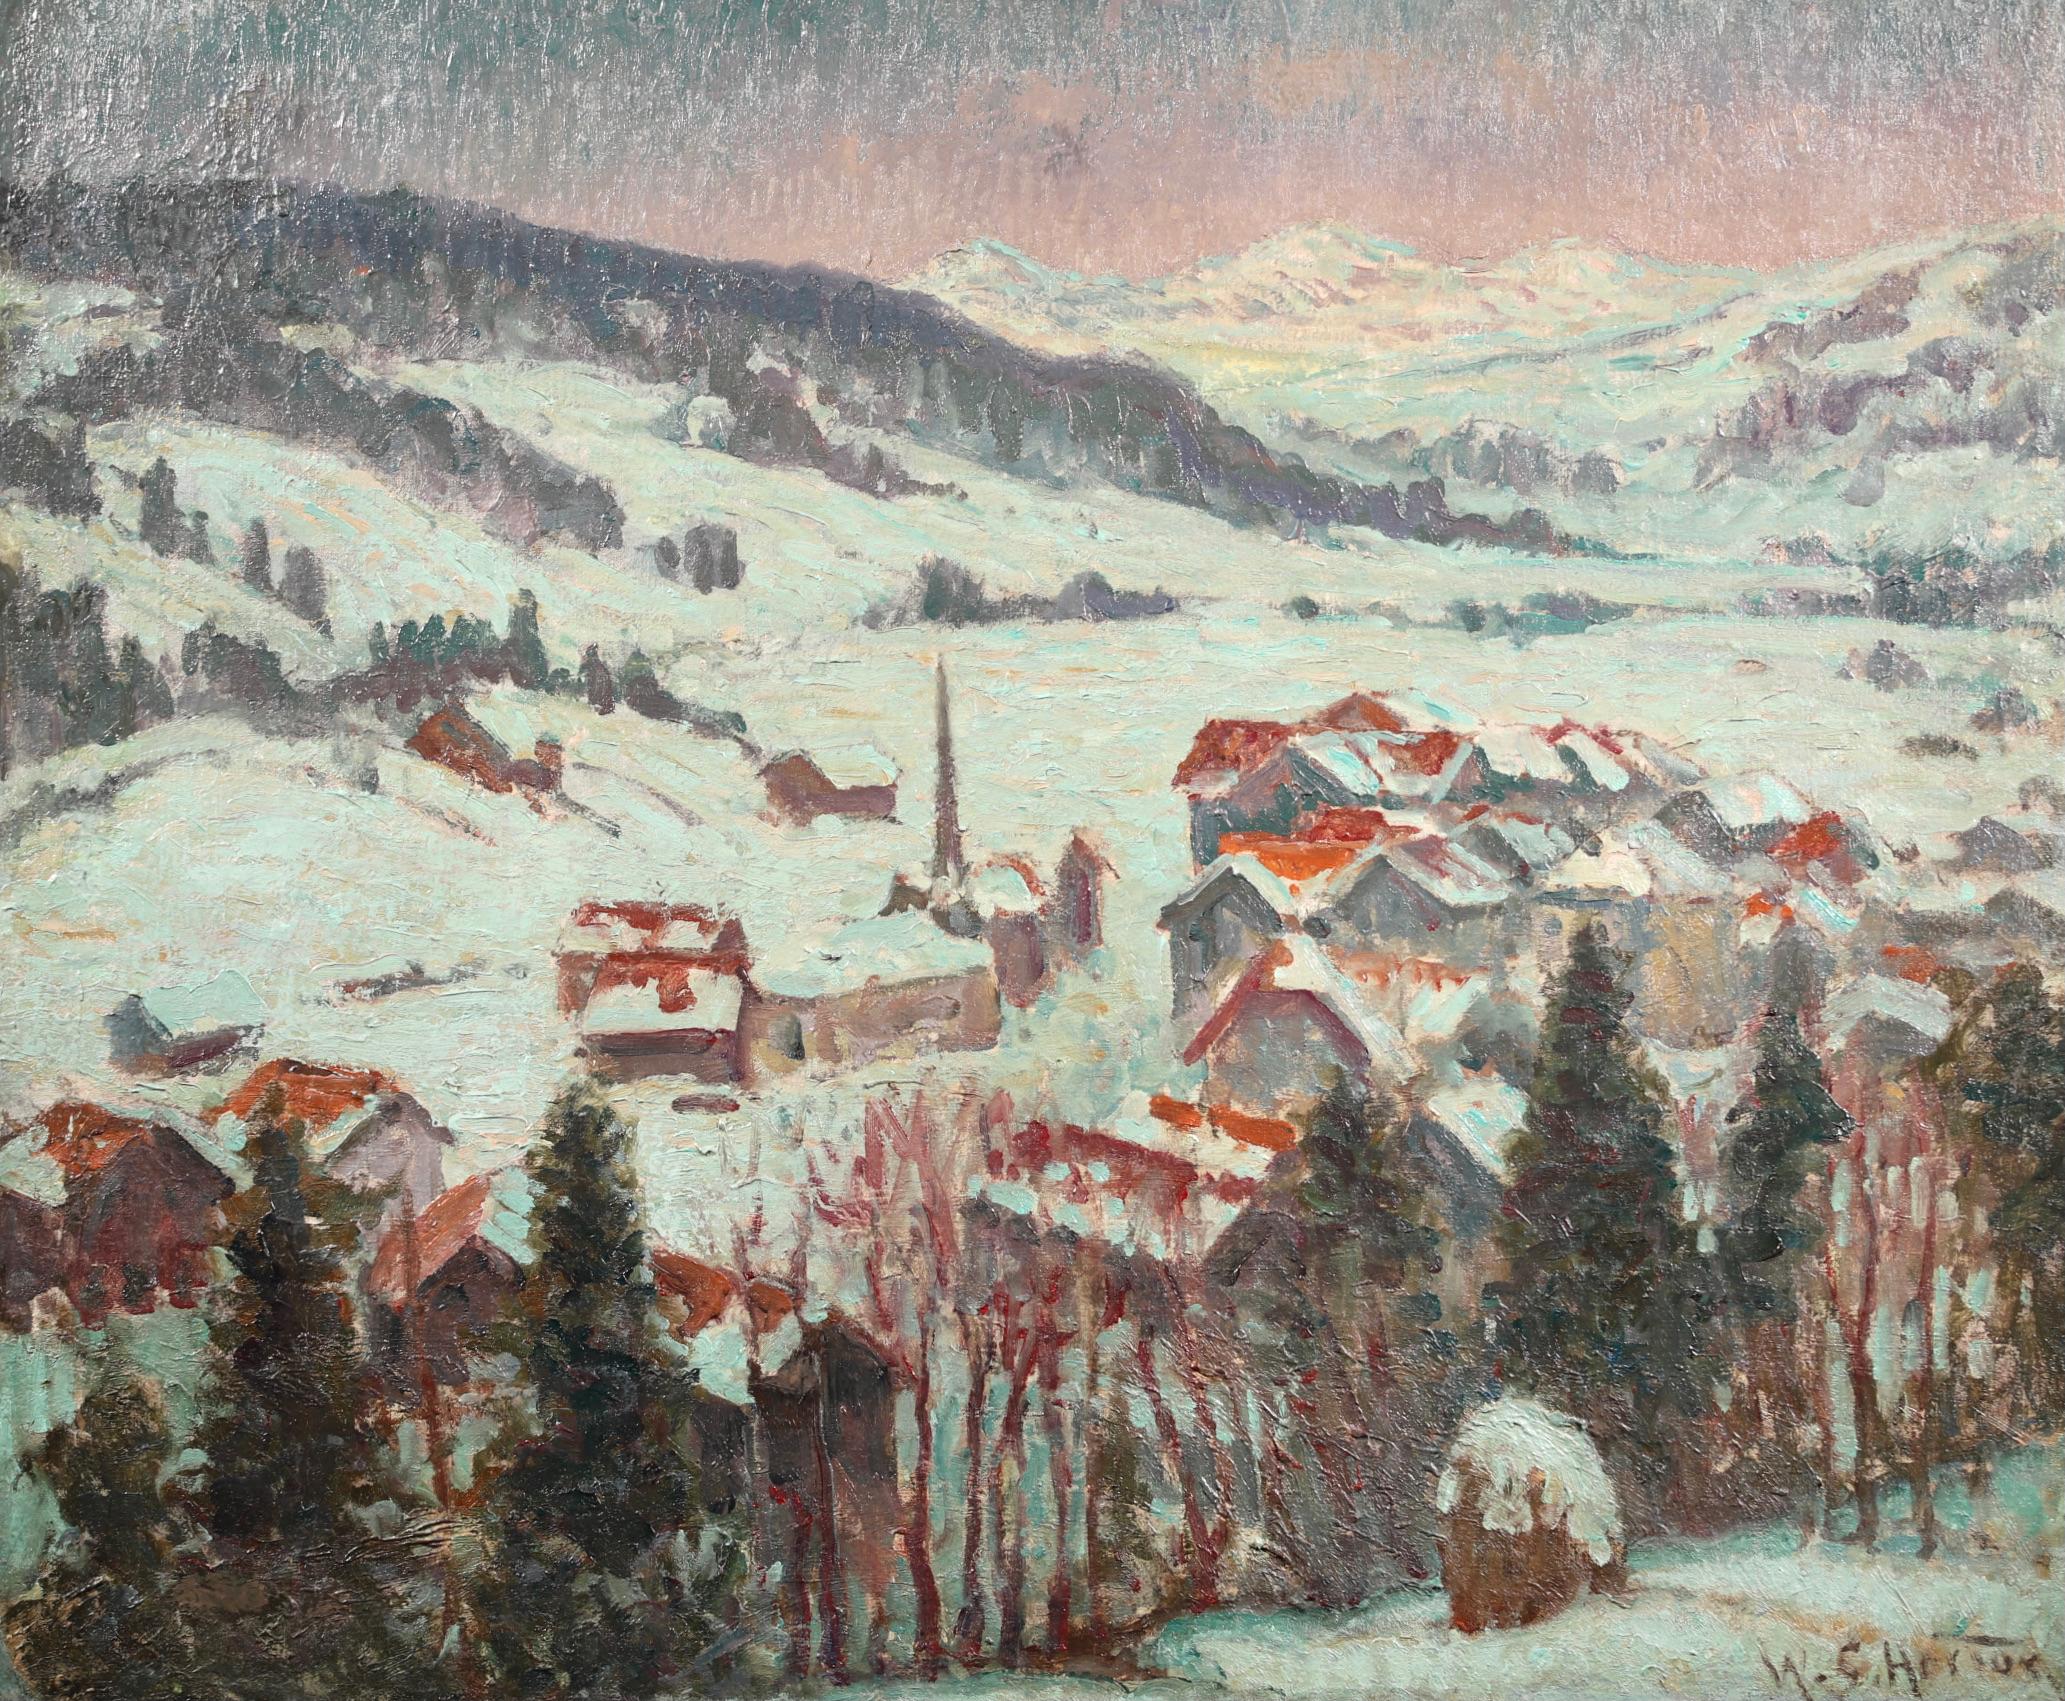 Signed oil on canvas landscape by American impressionist painter William Samuel Horton. The piece depicts a view of the town of Gstaad in Southwestern Switzerland. The buildings and landscape are covered in a blanket of white snow and there is a